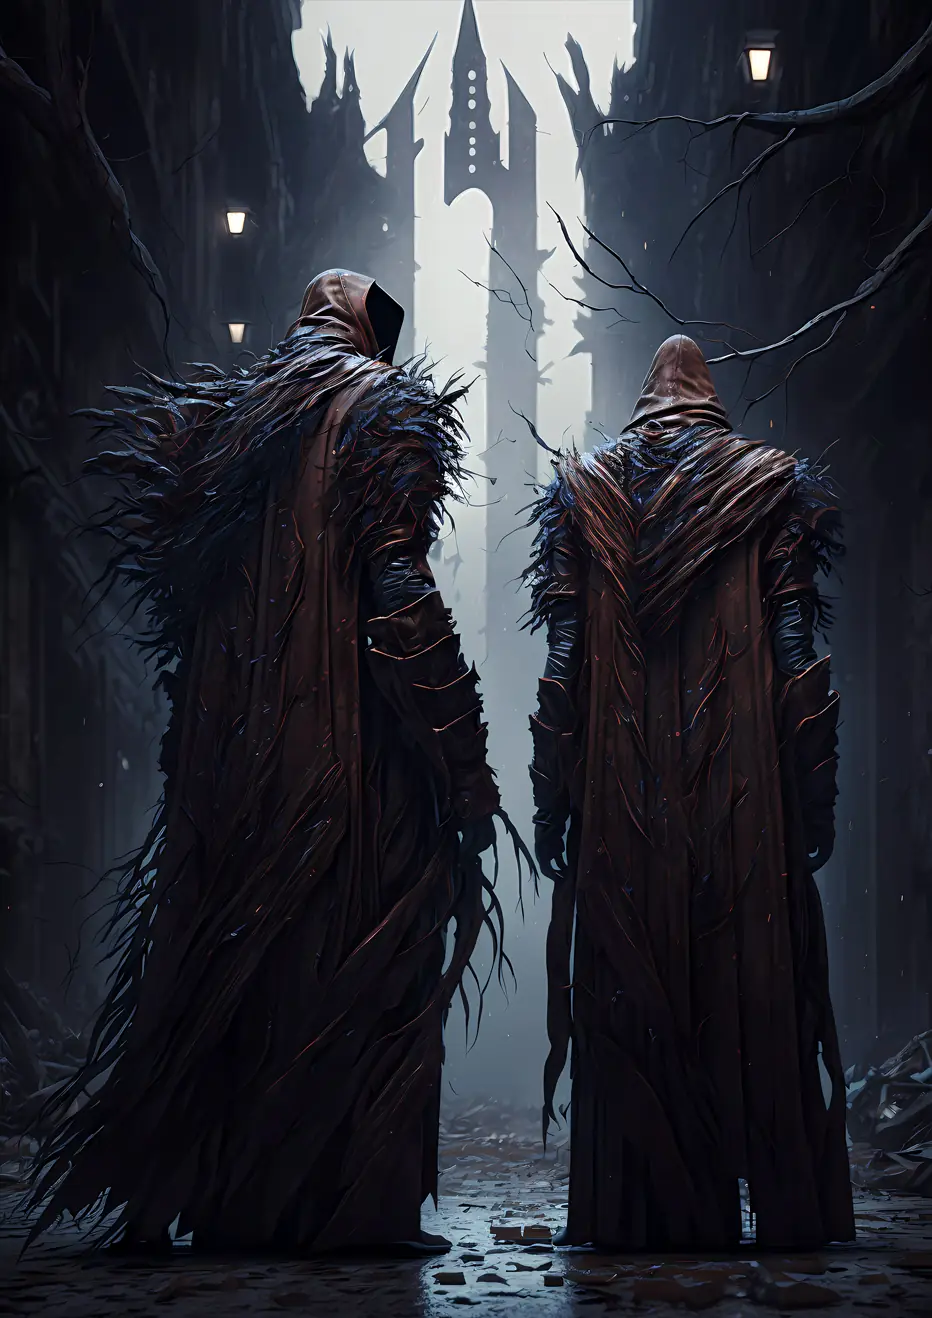 Pursuit of Profit - Two enigmatic figures with intertwined leather and feather cloaks stand in a desolated city.